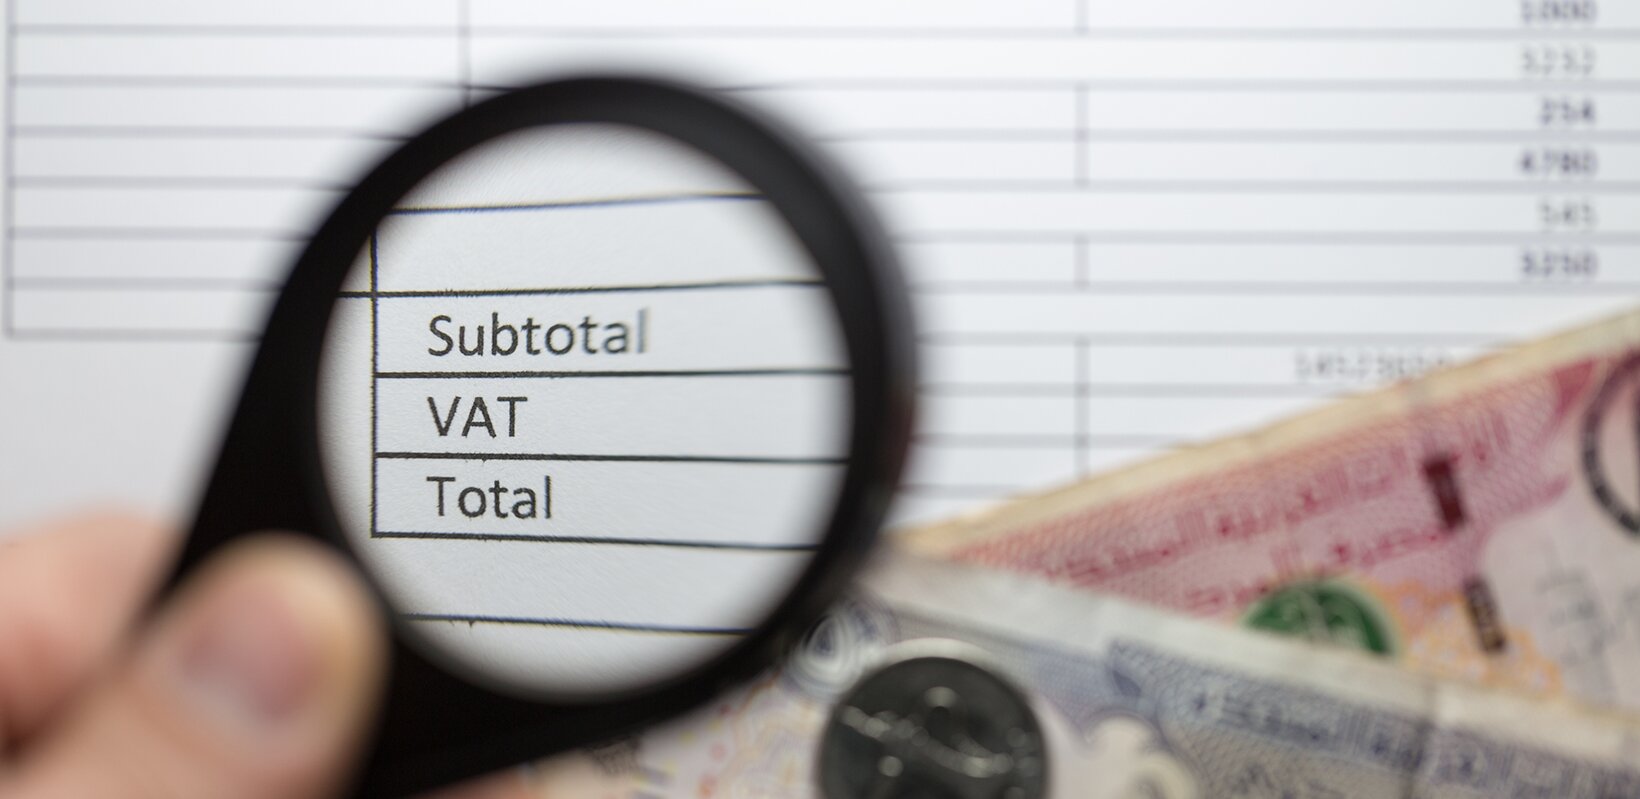 Government says ‘no plans’ to reduce hospitality VAT